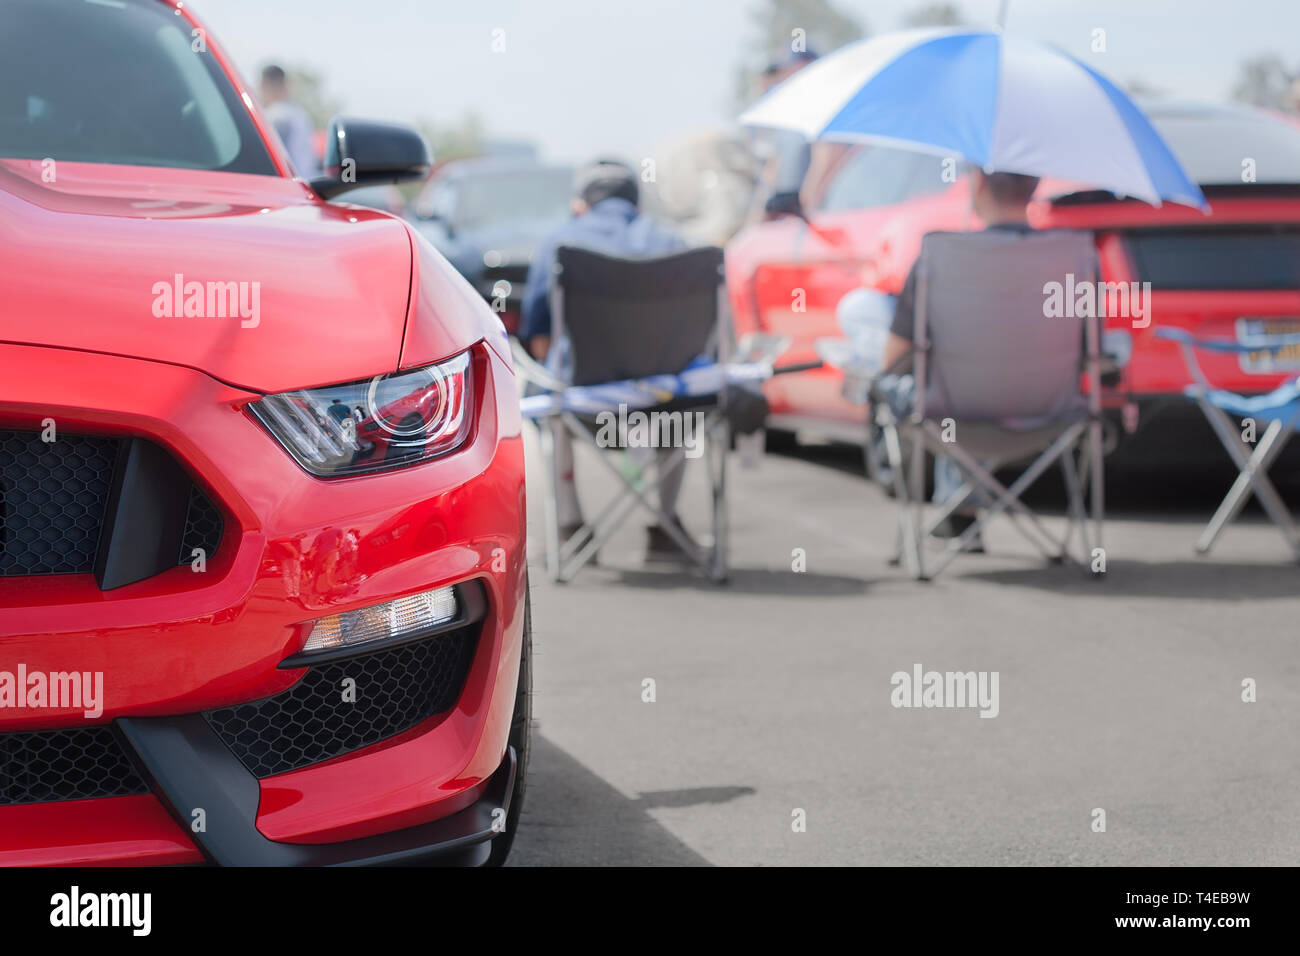 A mustang on display at the 2019 fabulous fords forever auto show with car owners sitting in the background. Stock Photo